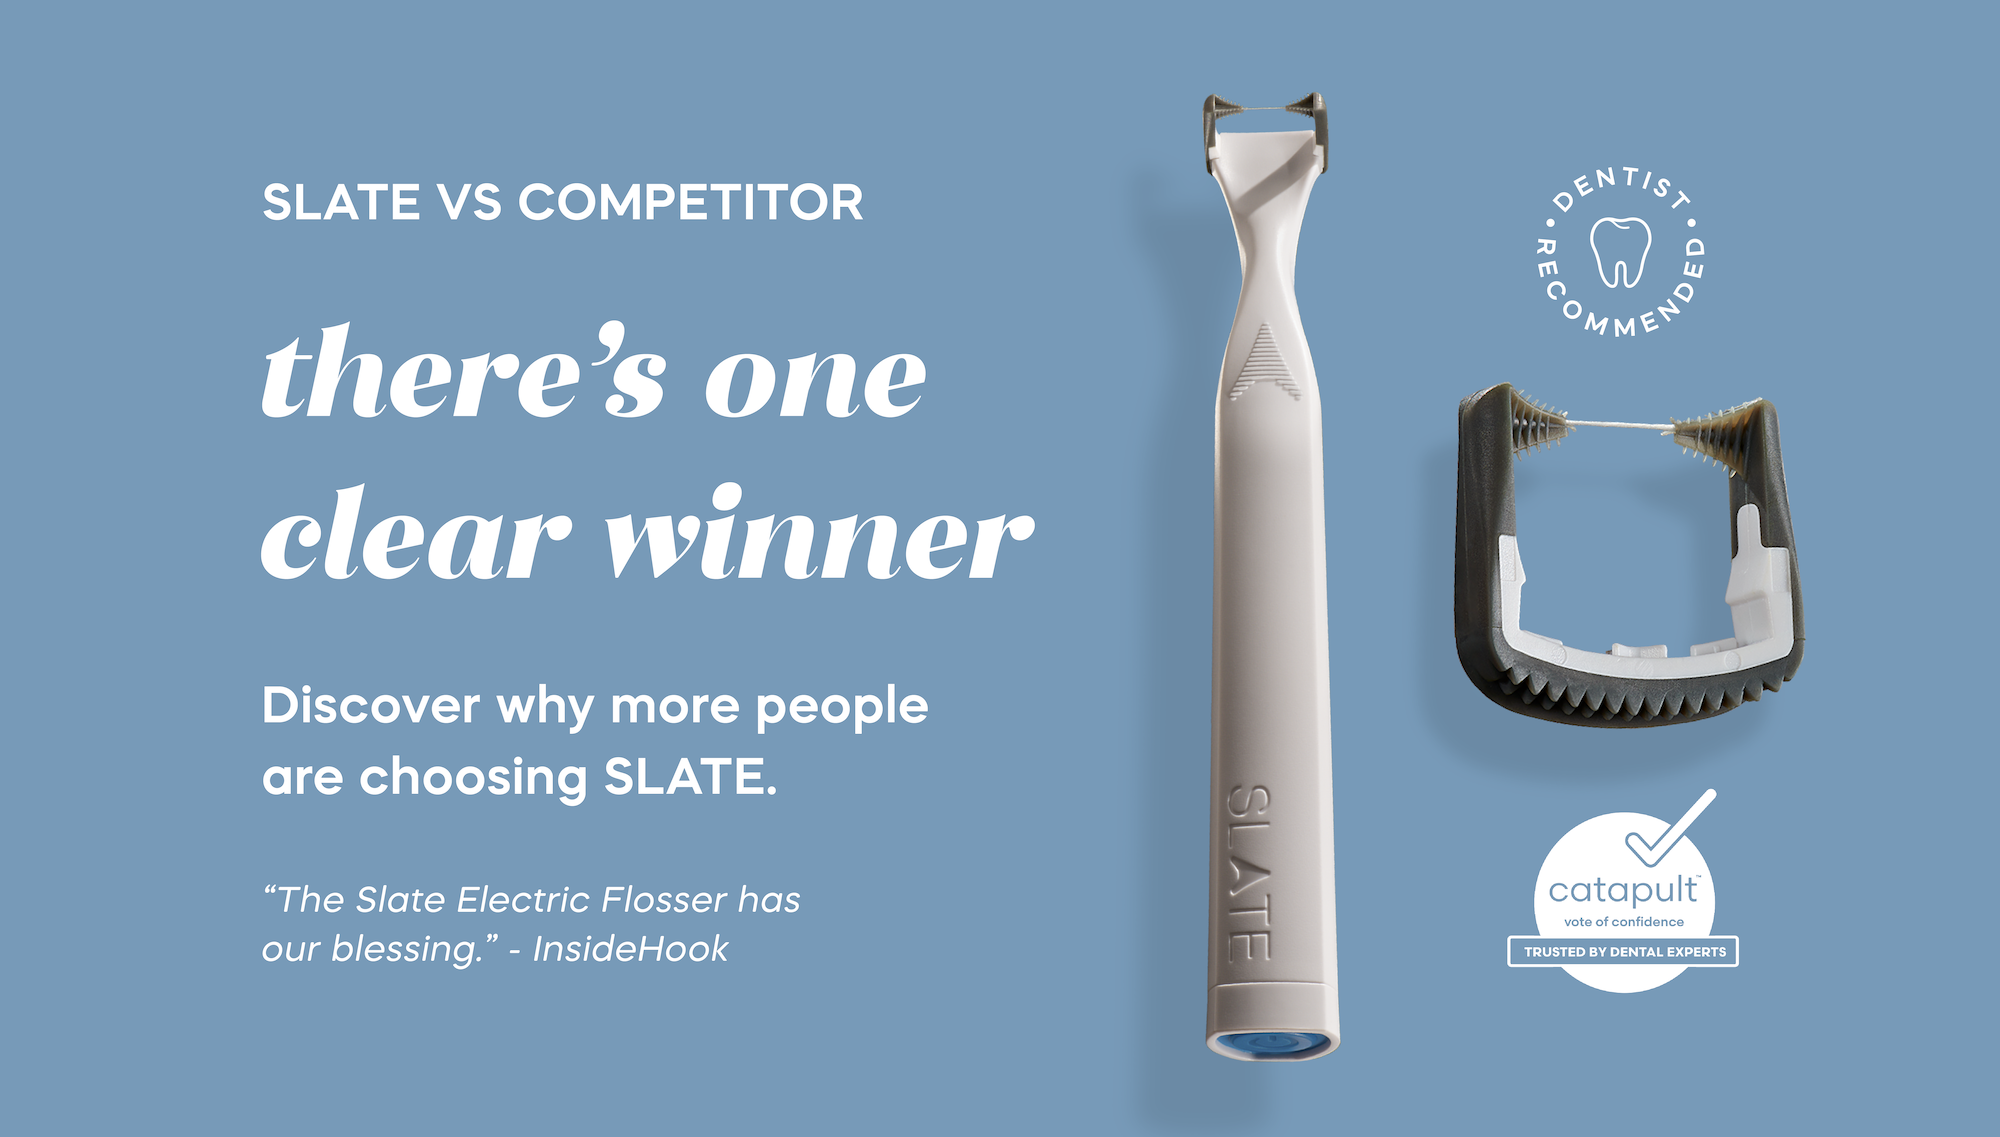 Slate vs Competitor: There's one clear winner. Discover why more people are choosing Slate.